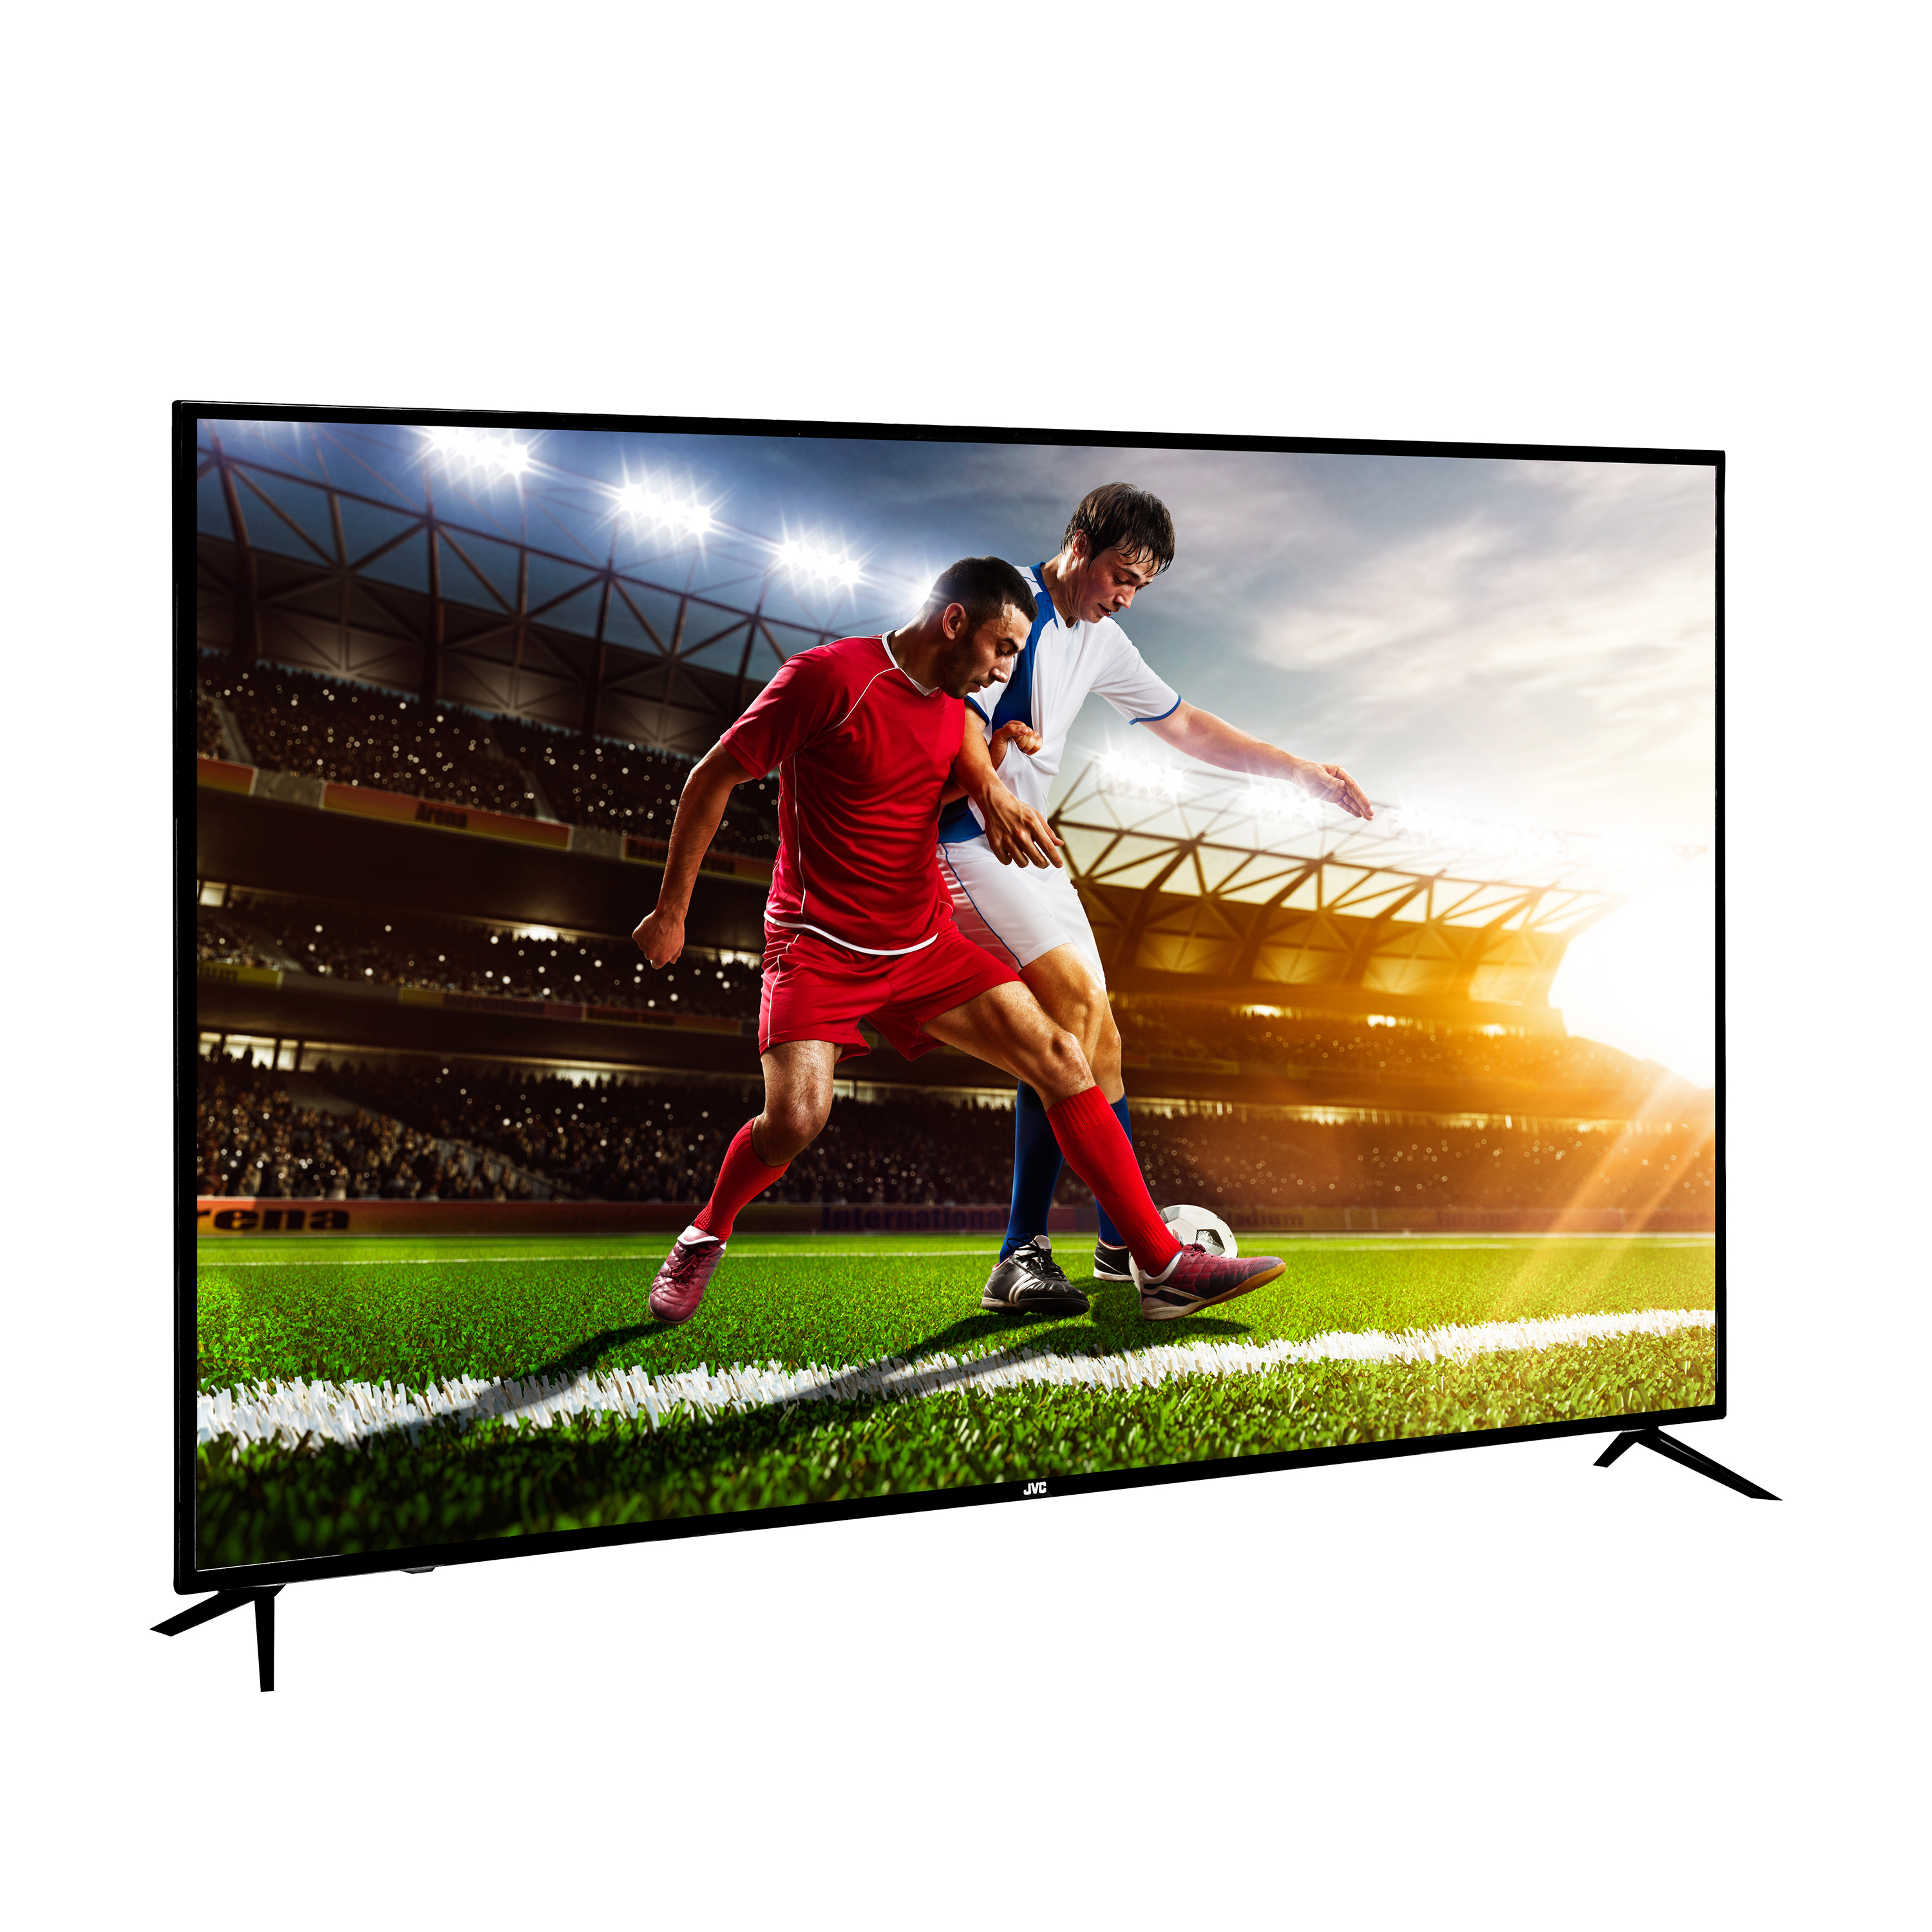 JVC 65" Class 4K Ultra HD (2160p) HDR Smart LED TV with Built-in Chromecast (LT-65MA875) - image 8 of 8